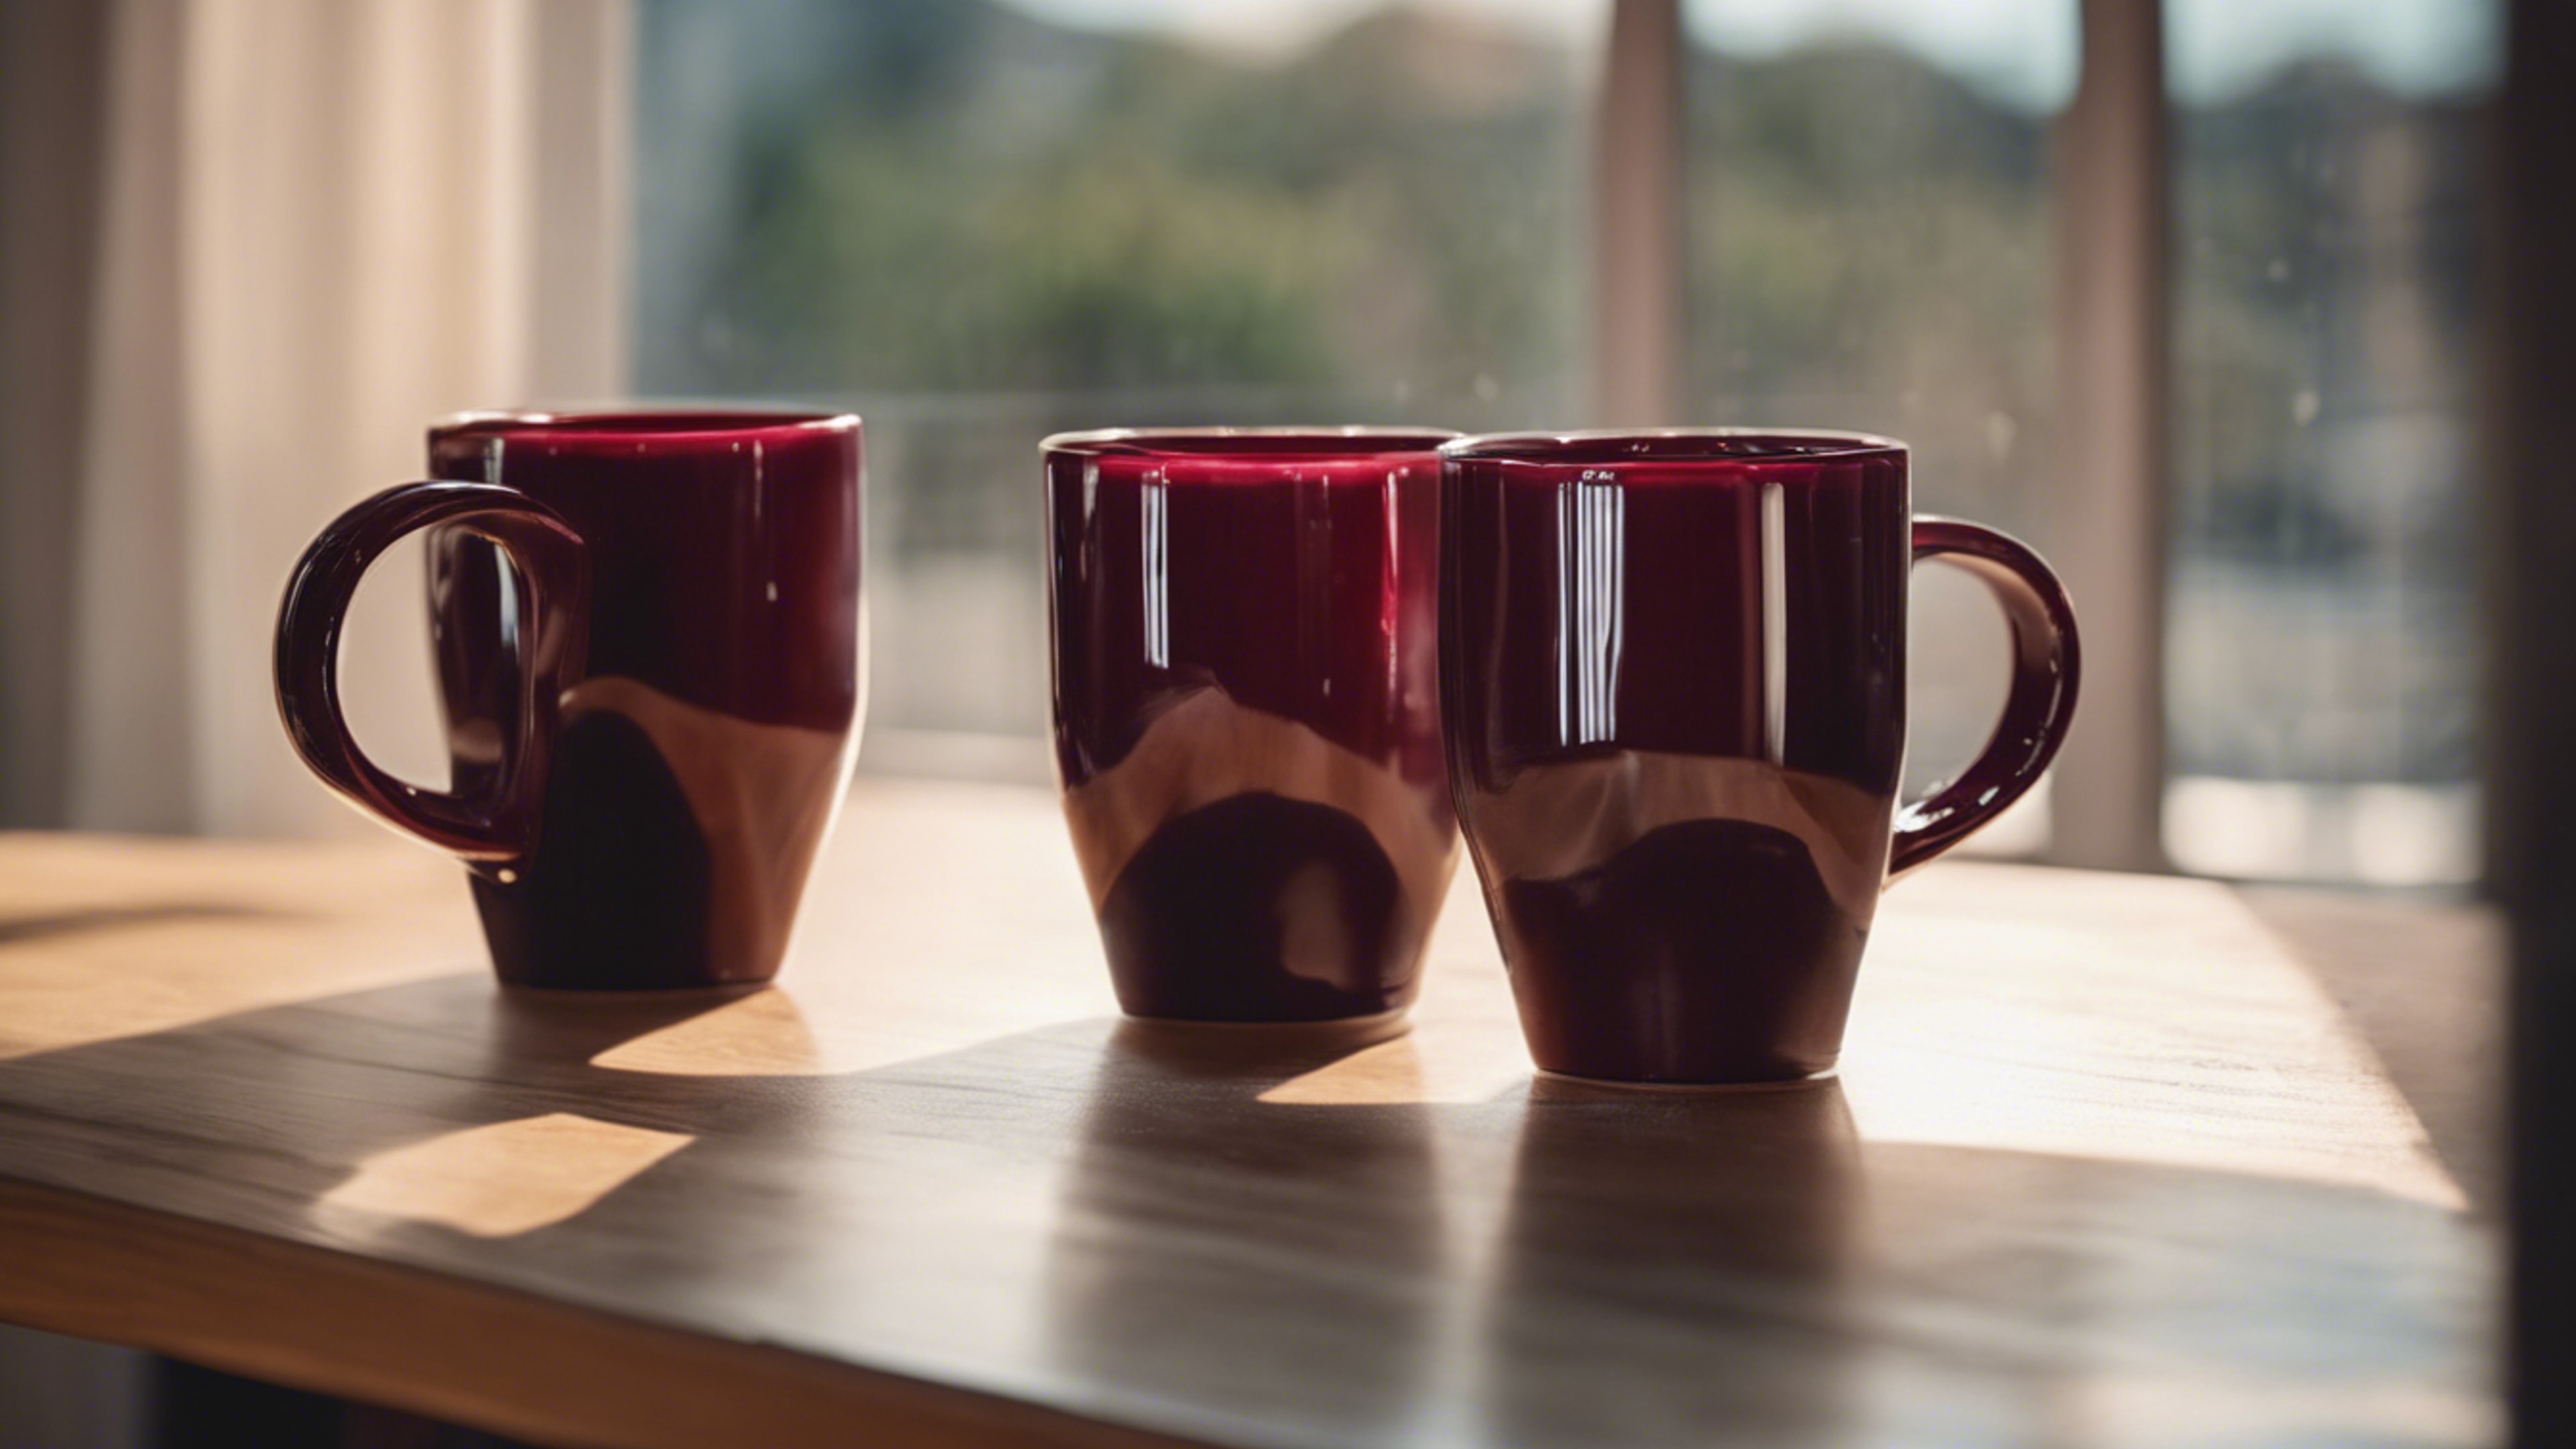 Two cool maroon ceramic coffee mugs set on a wooden table in front of a sunny window.壁紙[32923f9dbf0d44d9b281]